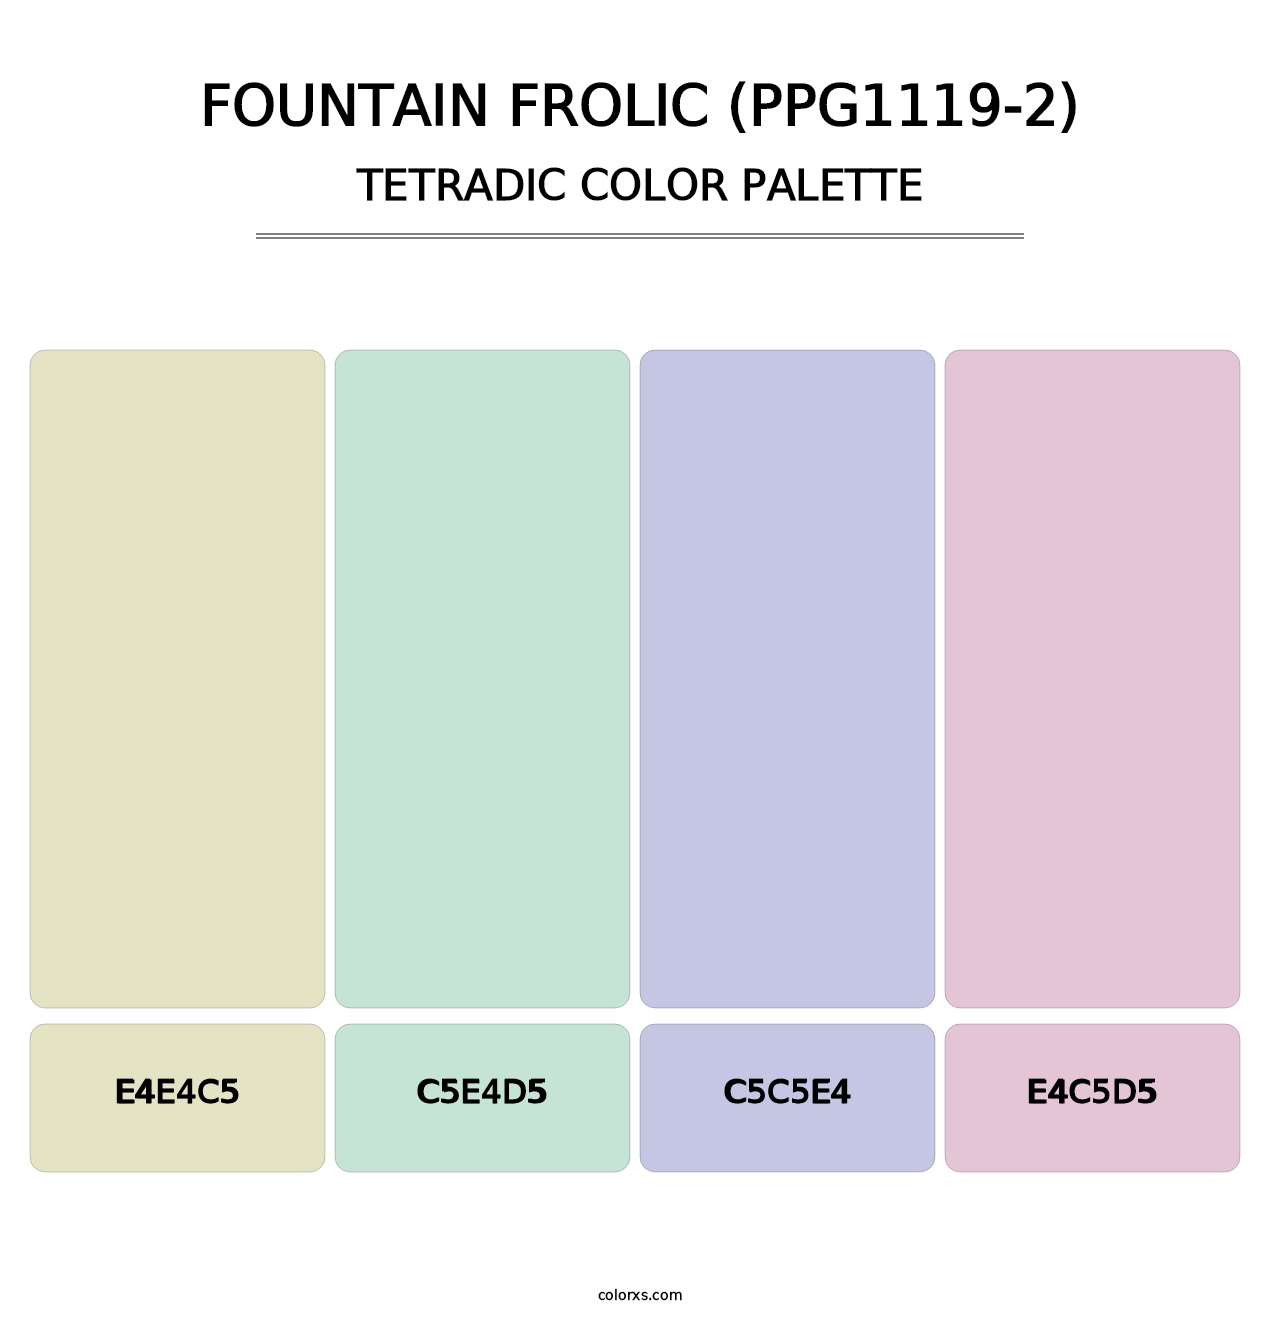 Fountain Frolic (PPG1119-2) - Tetradic Color Palette